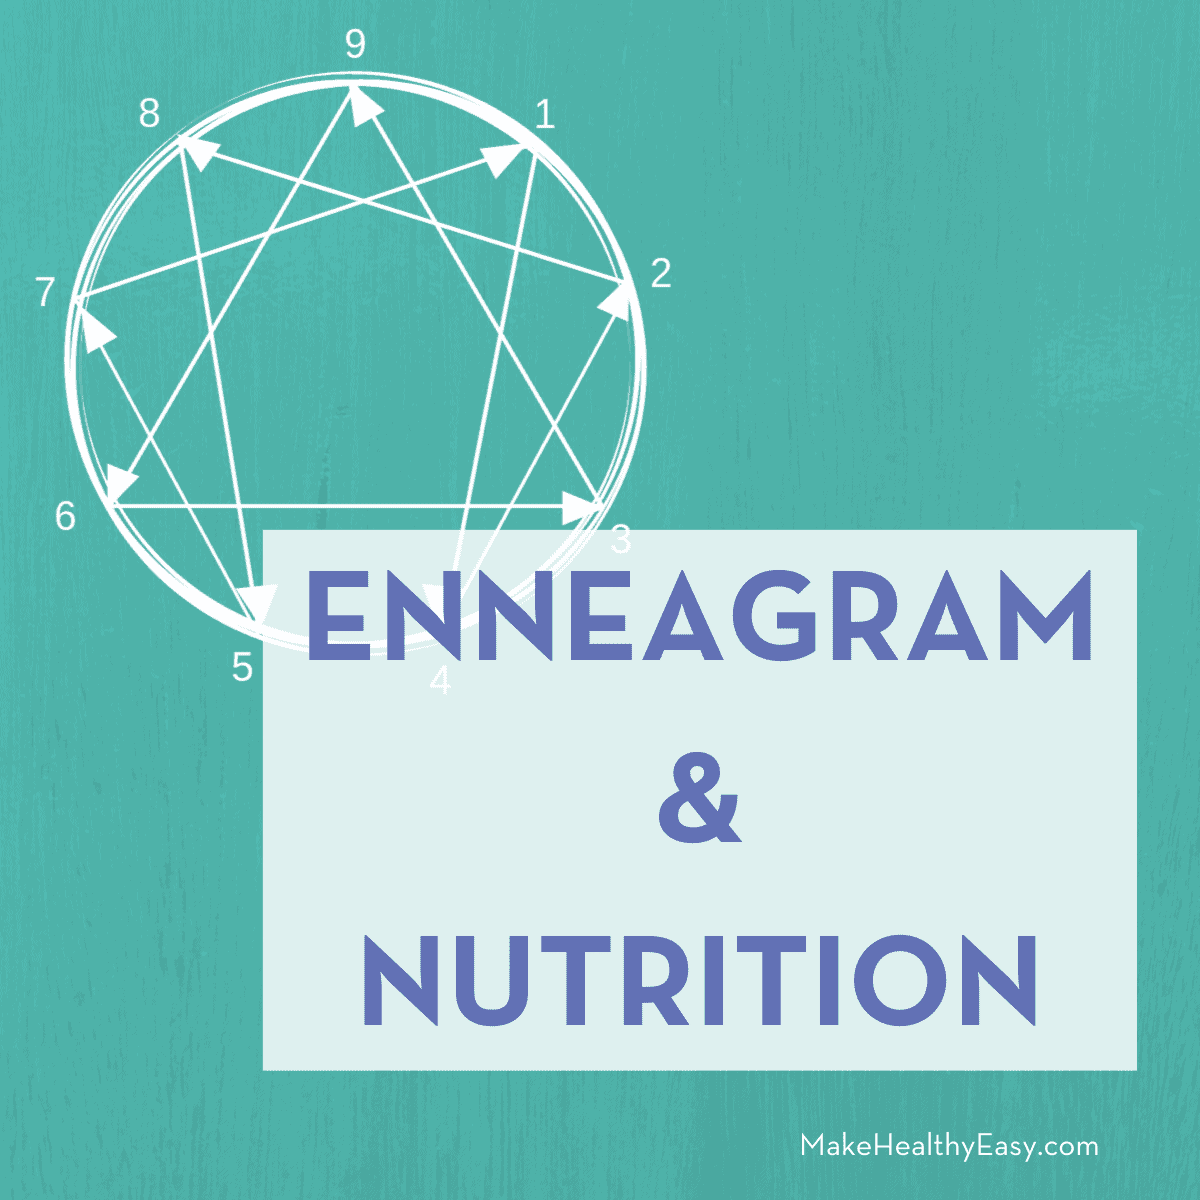 Enneagram & Nutrition - Is there a connection between the two? Quite possibly. Read more about the Enneagram & Eating Project at MakeHealthyEasy.com